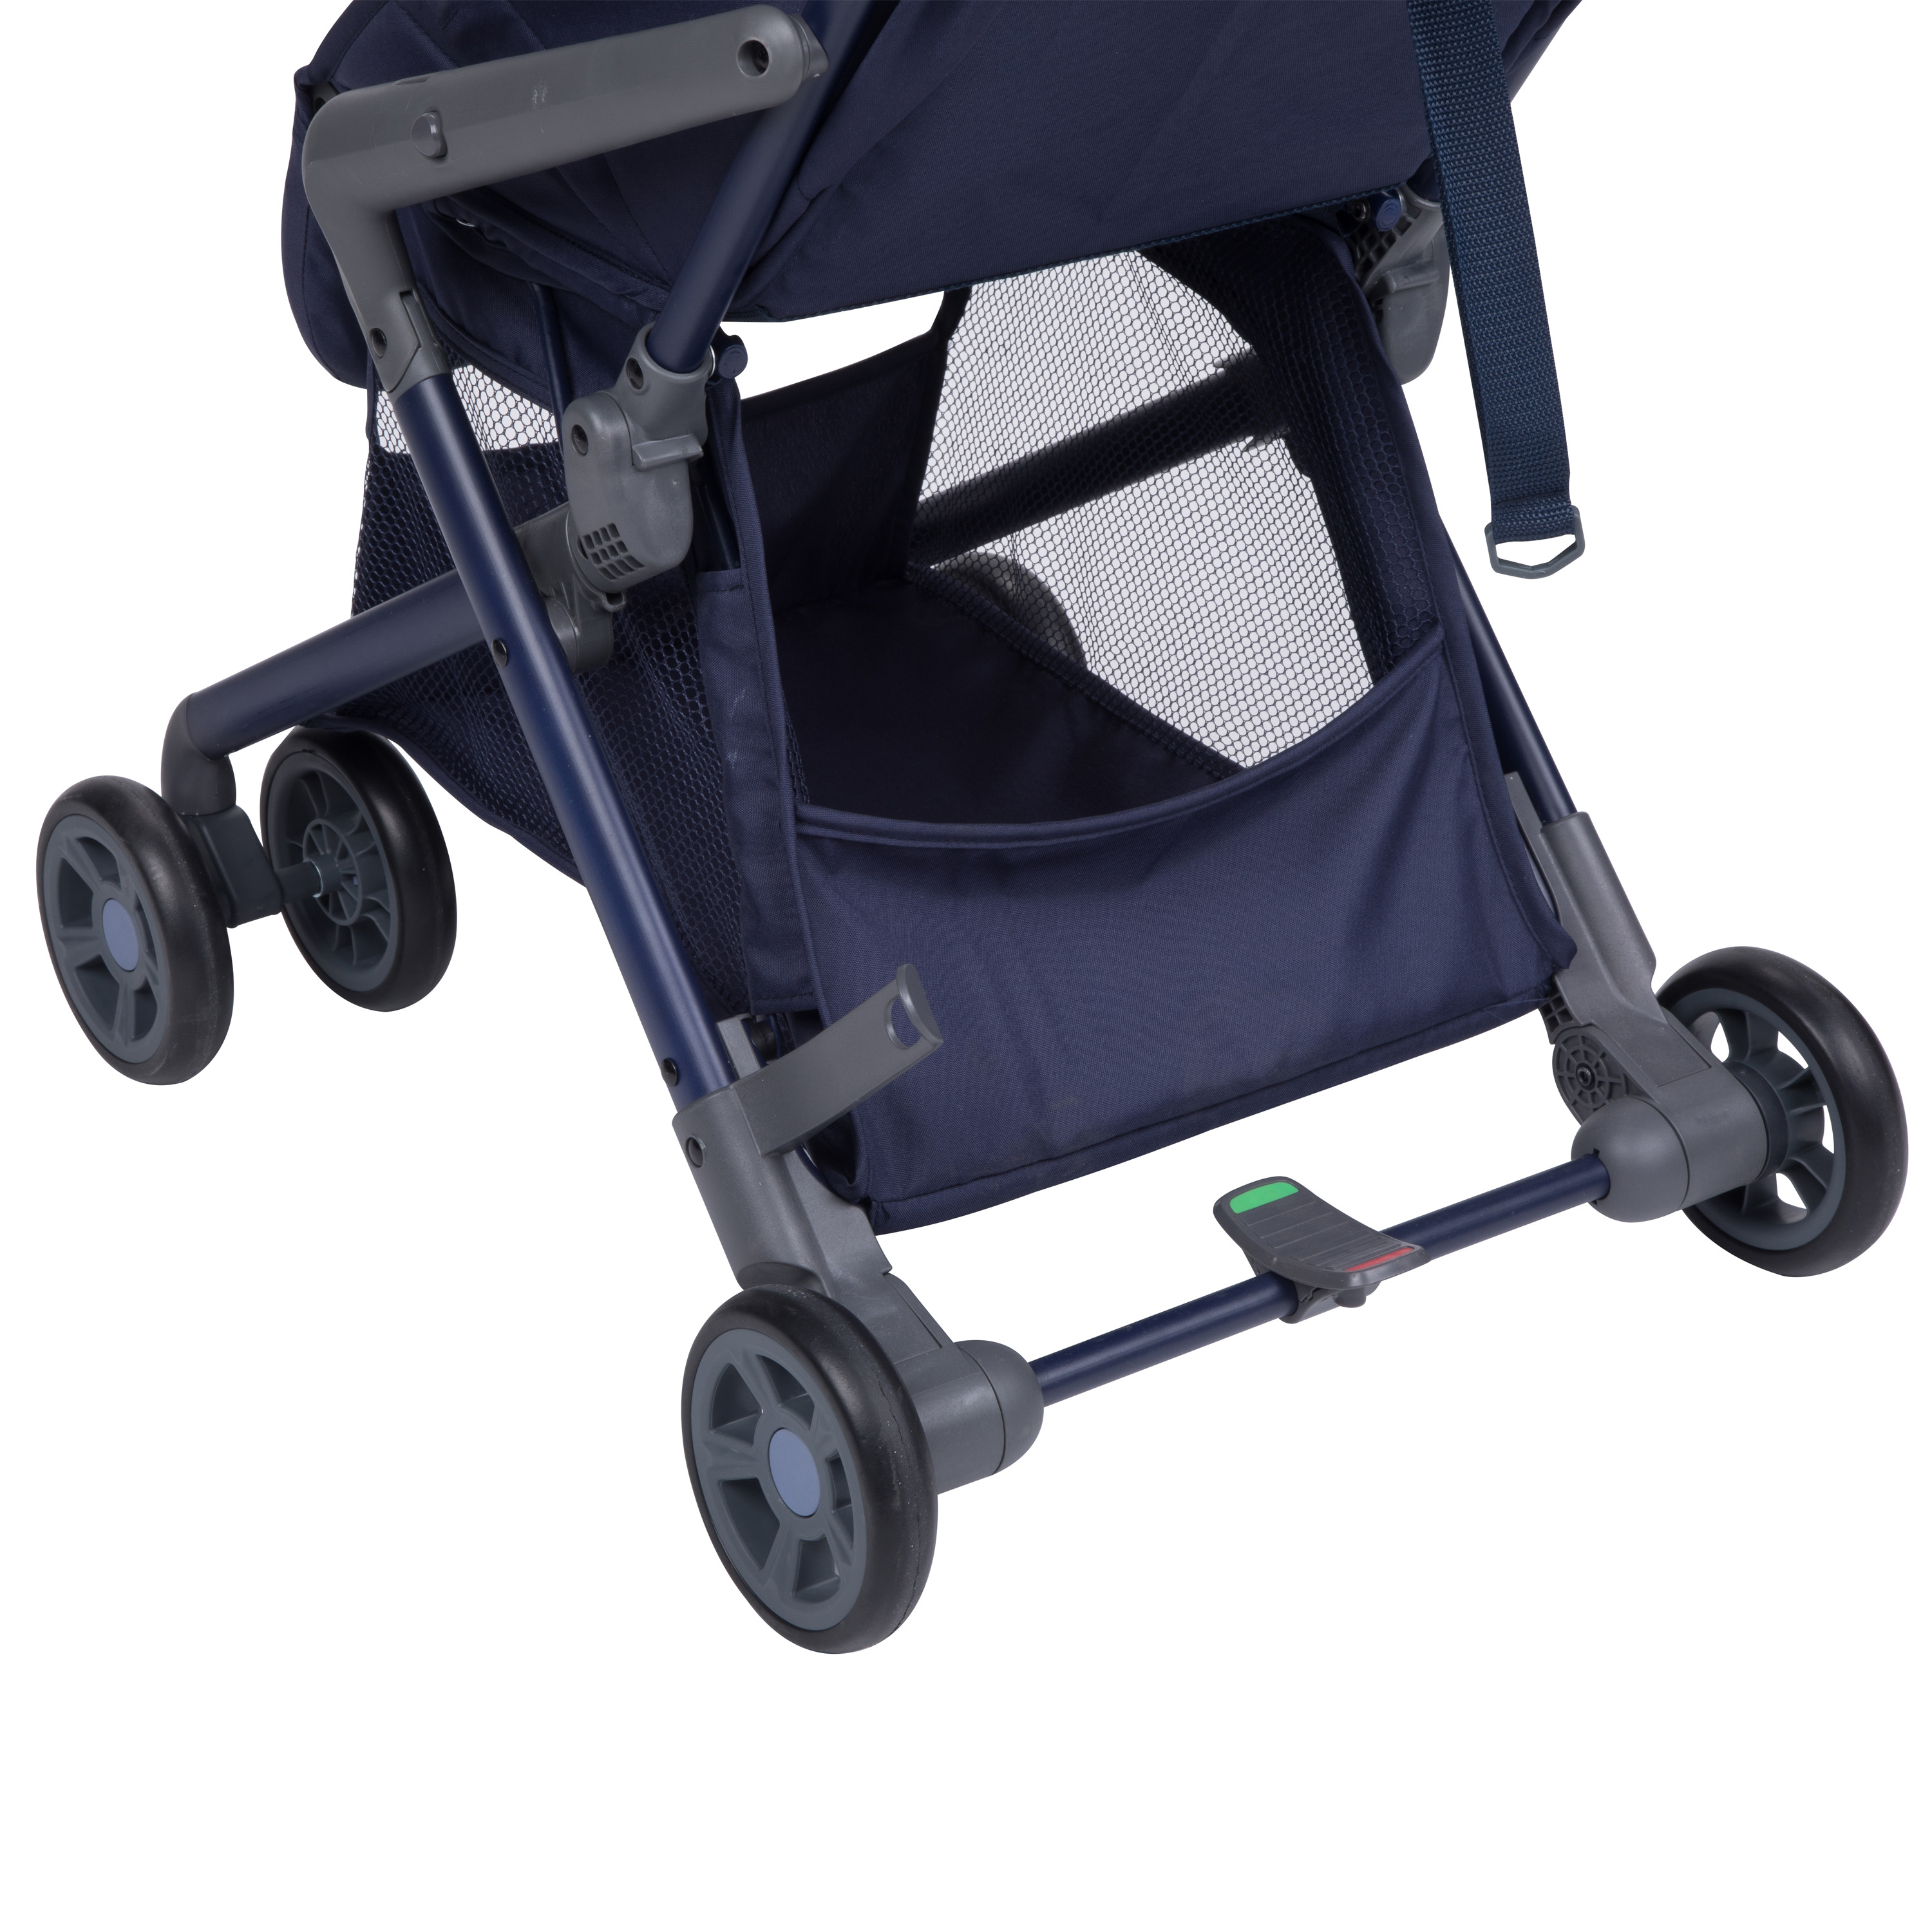 MonBebe Cube Compact Stroller with storage and visor, Blue Boho - image 8 of 17